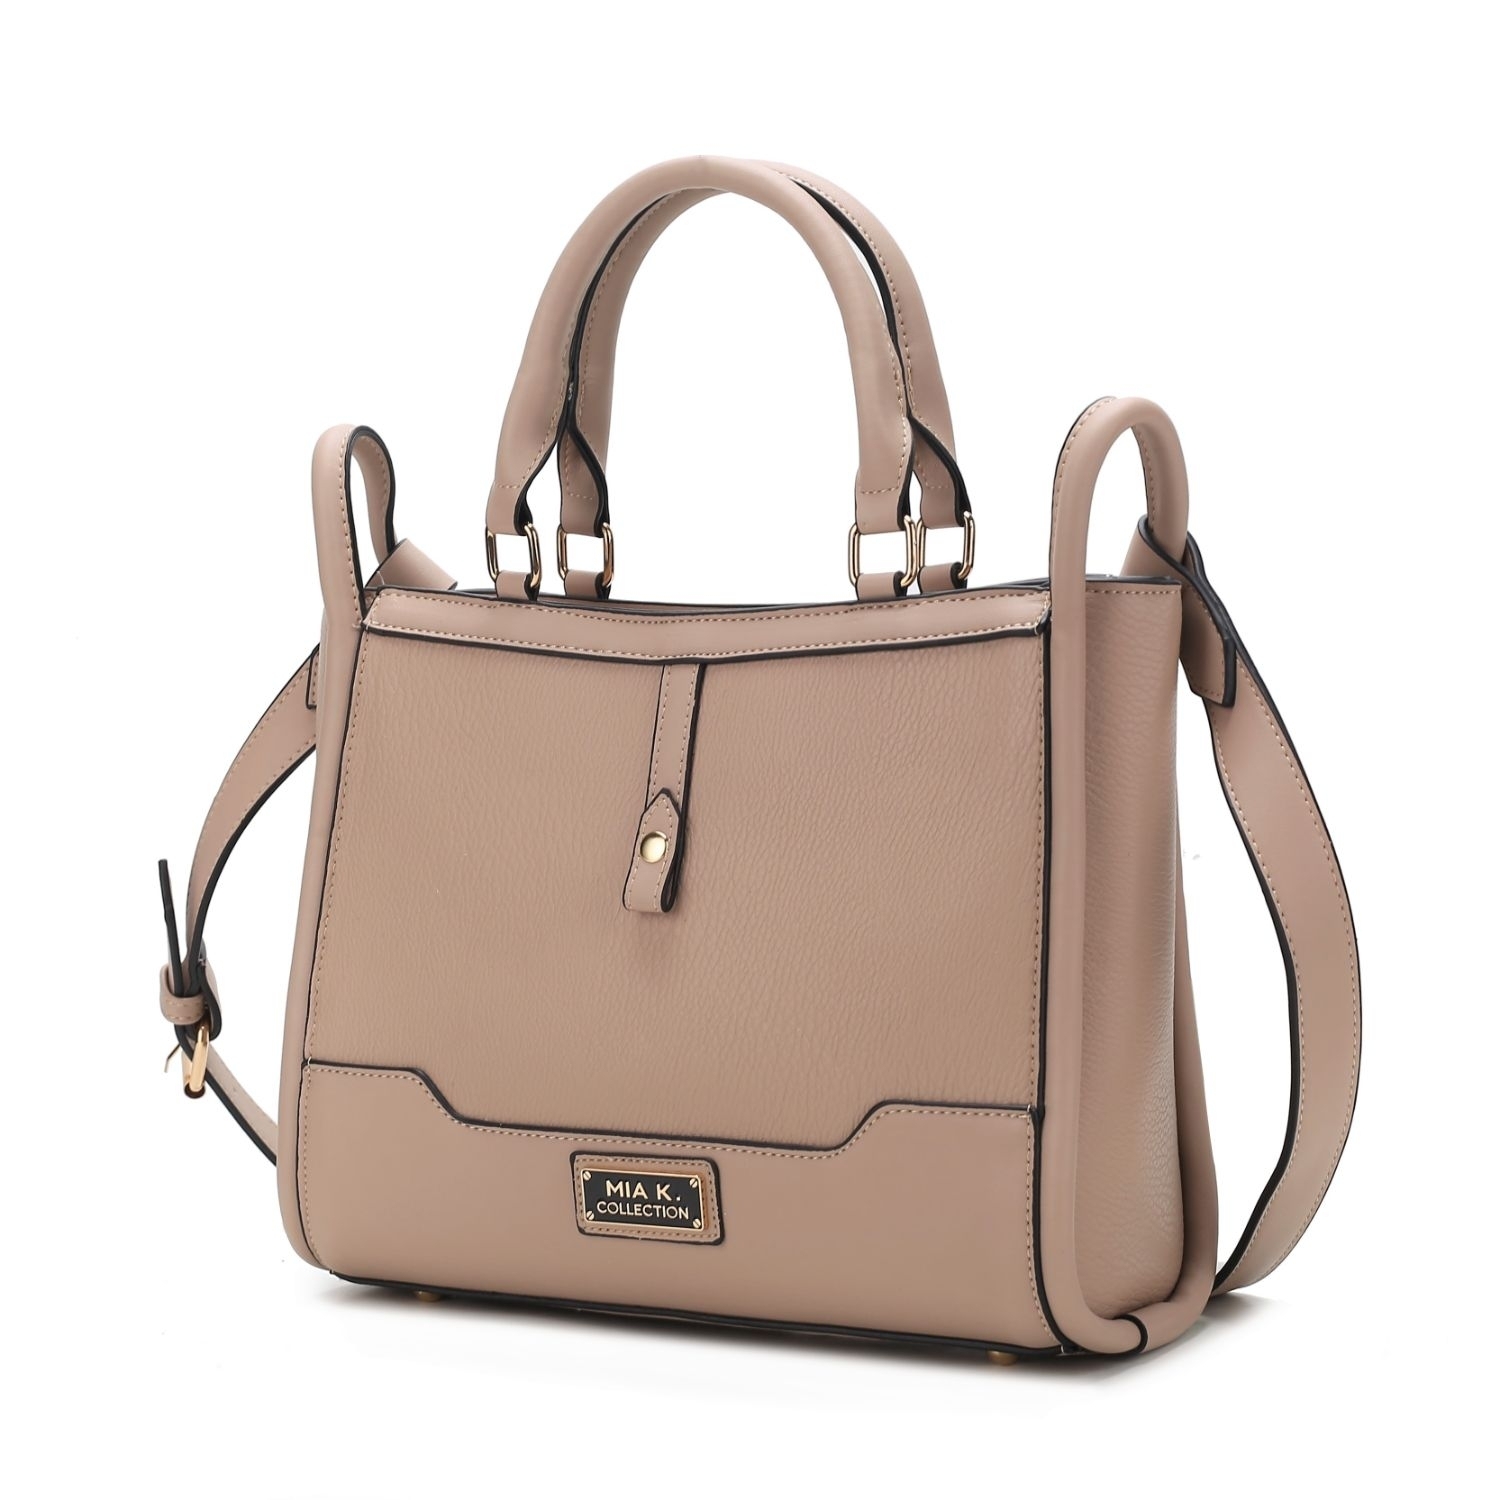 MKF Collection Melody Vegan Leather Tote By Mia K - Taupe